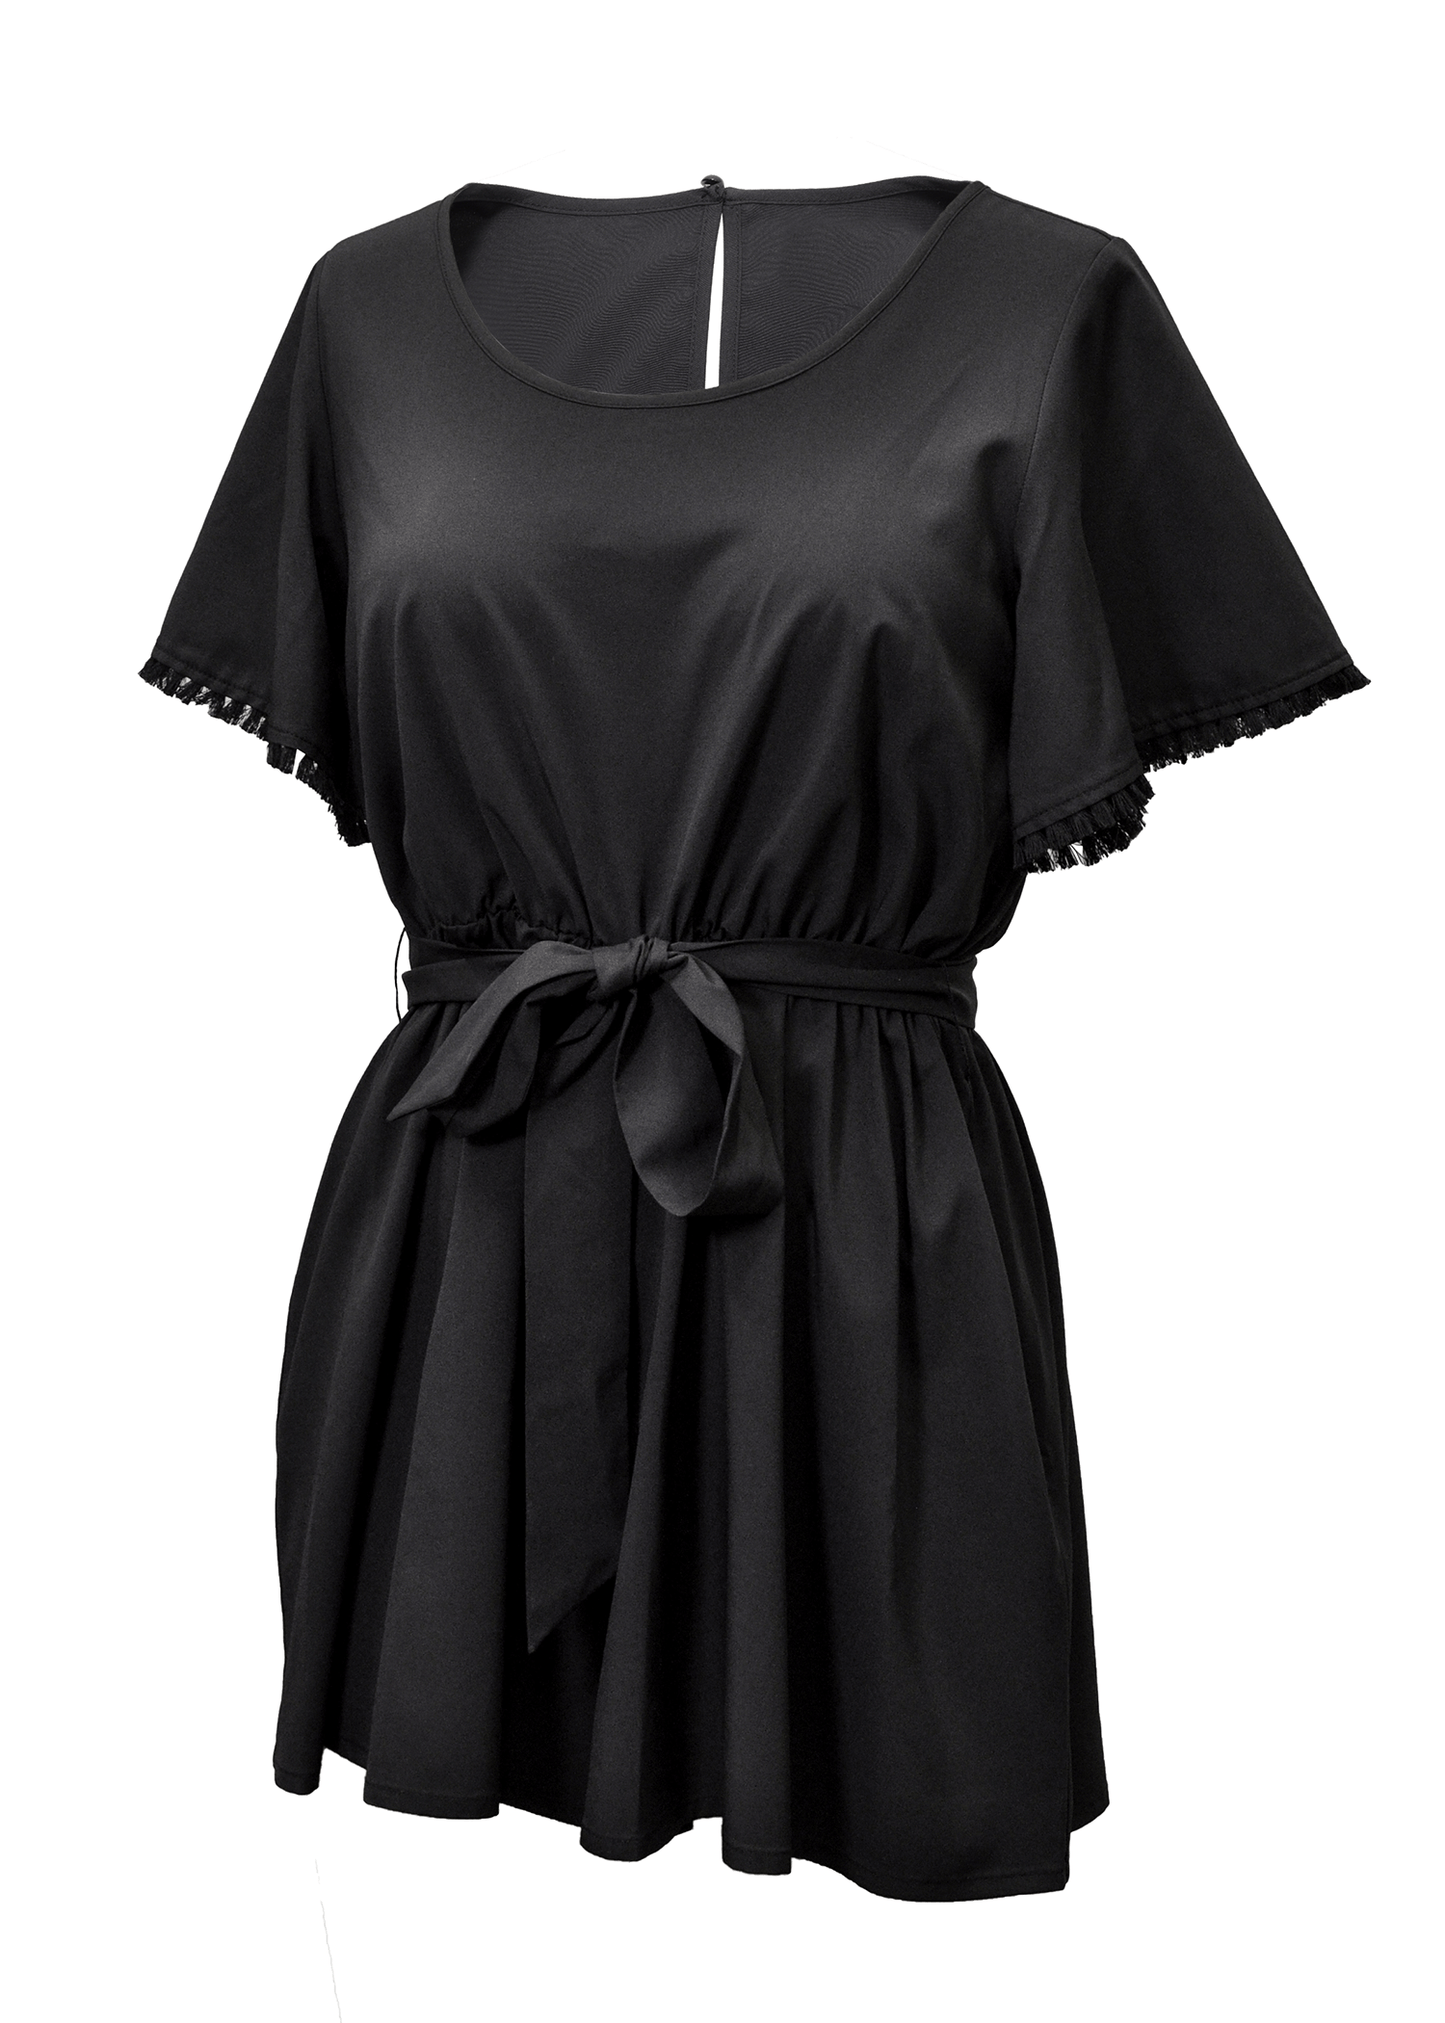 Young USA Casual Spring Romper with Front Tie in Black. Front View.